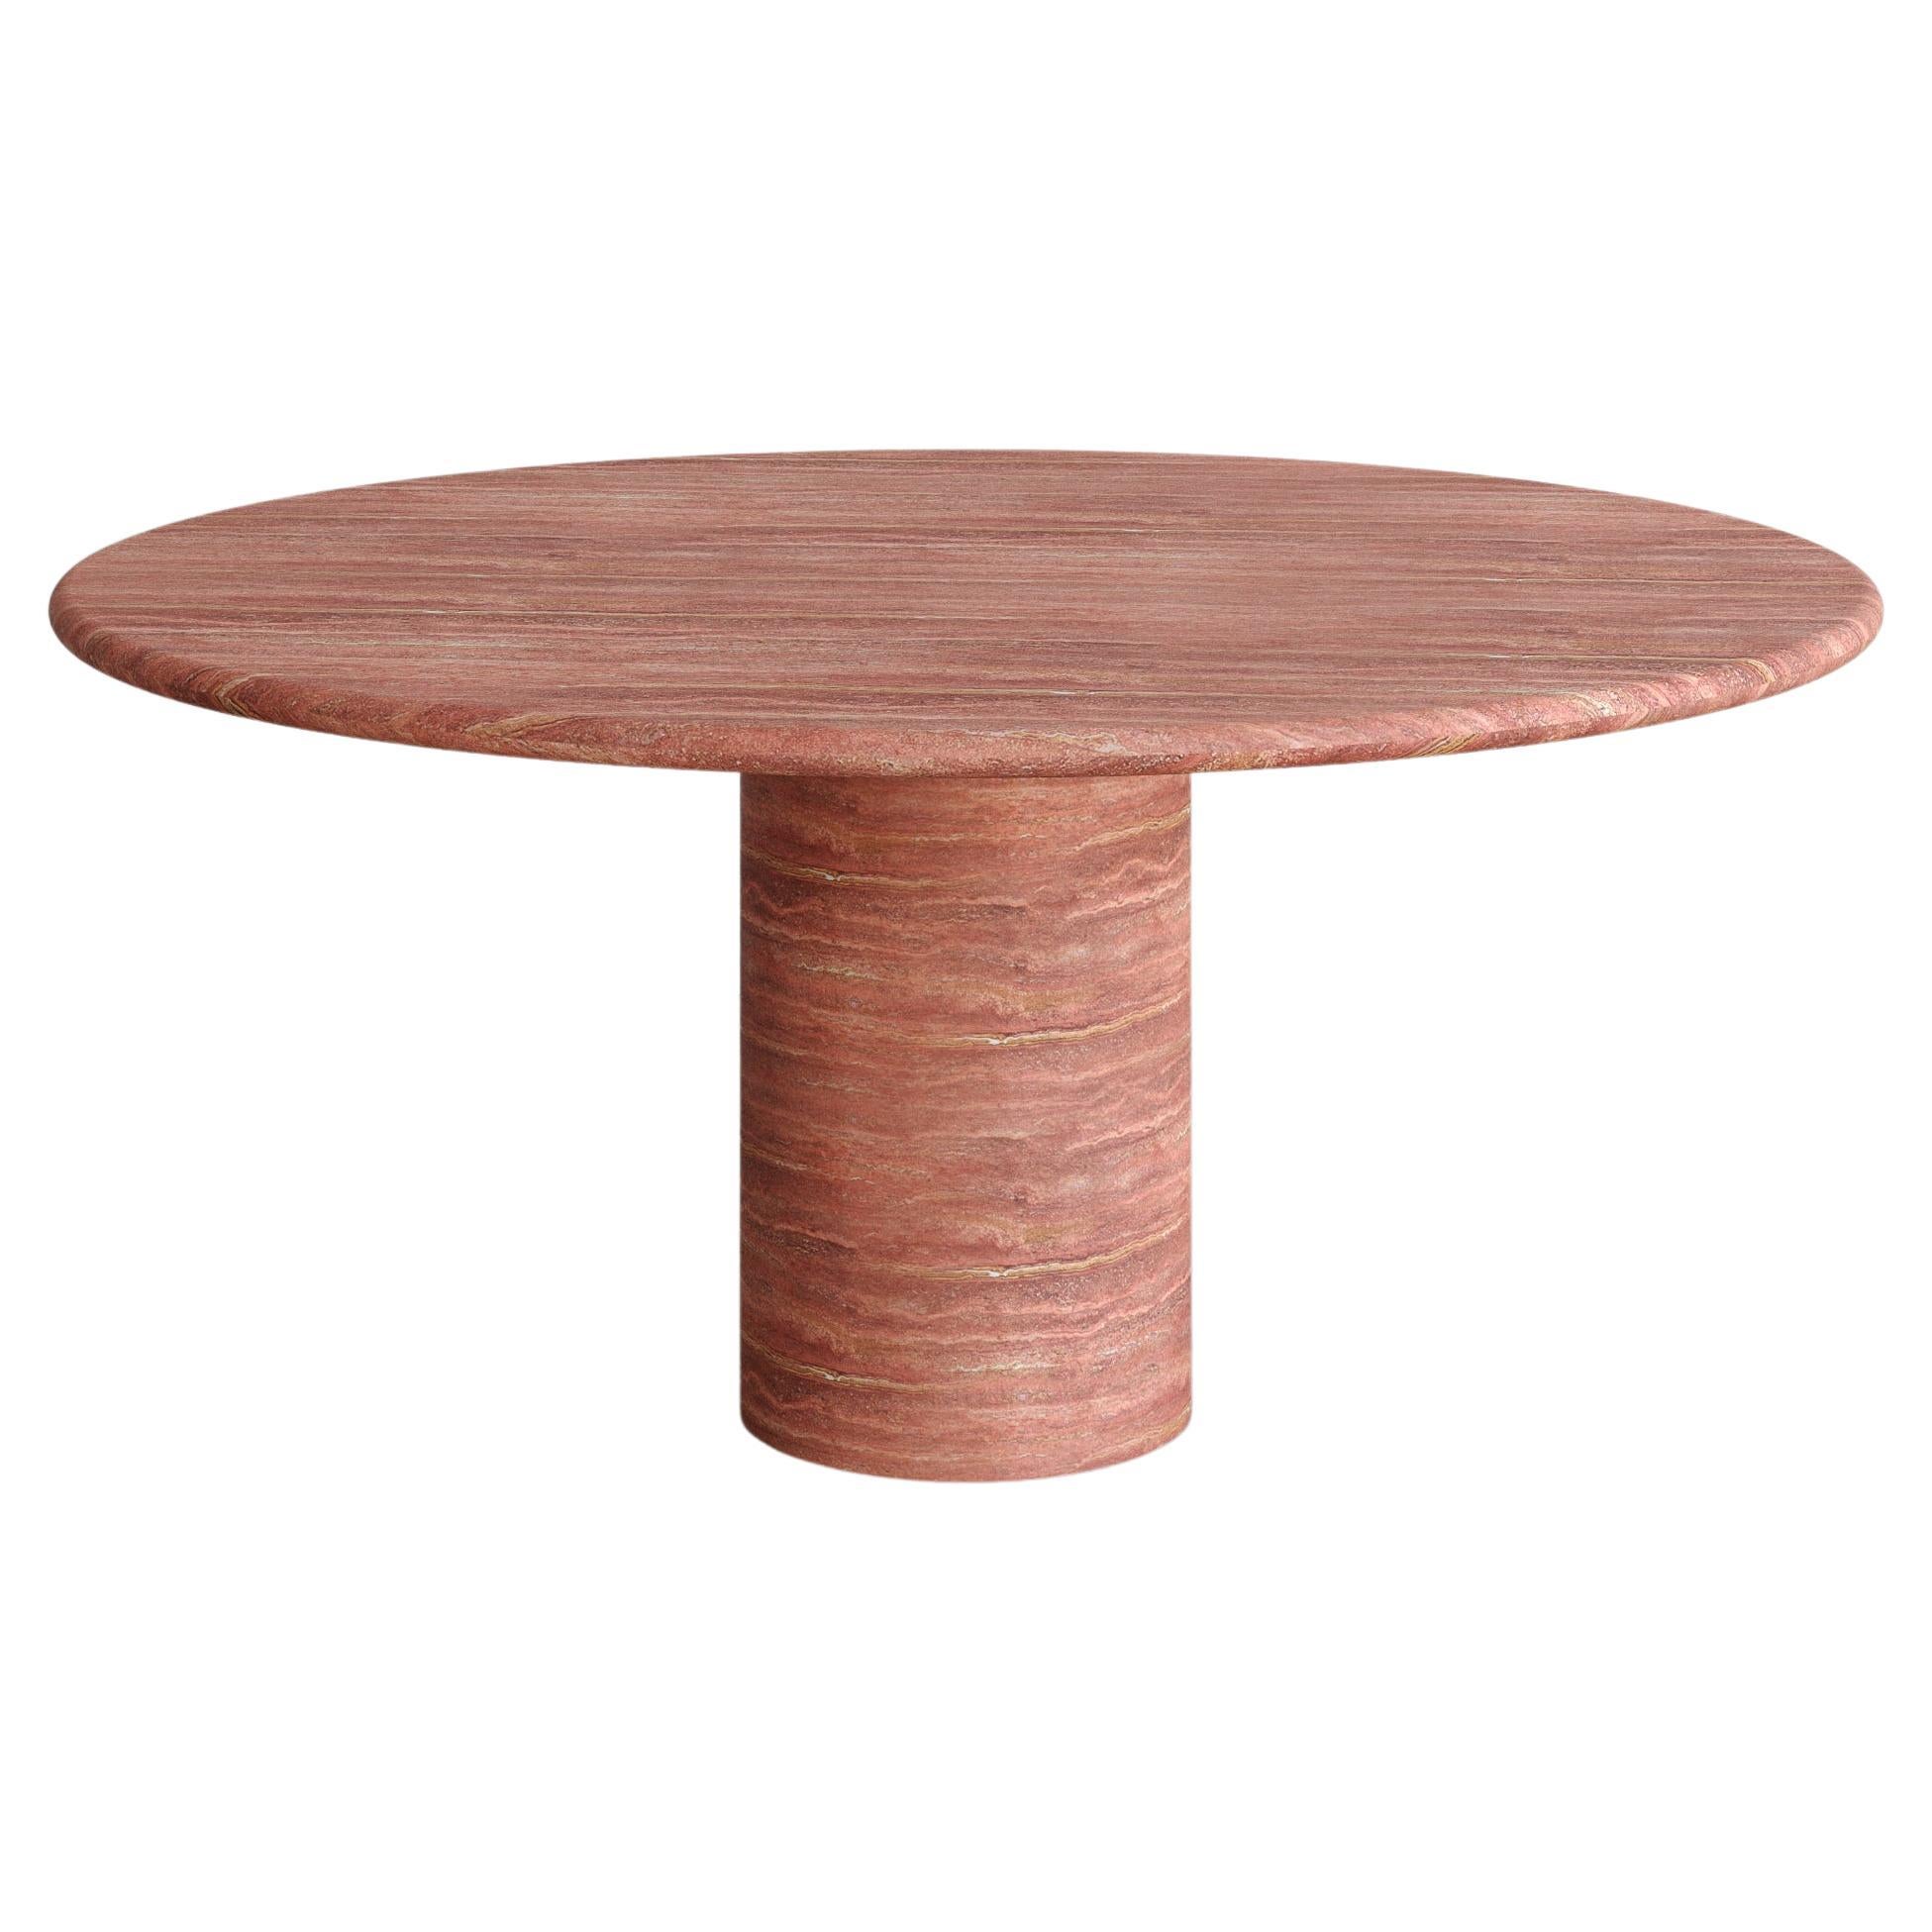 Desert Red Travertine Voyage Dining Table i by the Essentialist For Sale